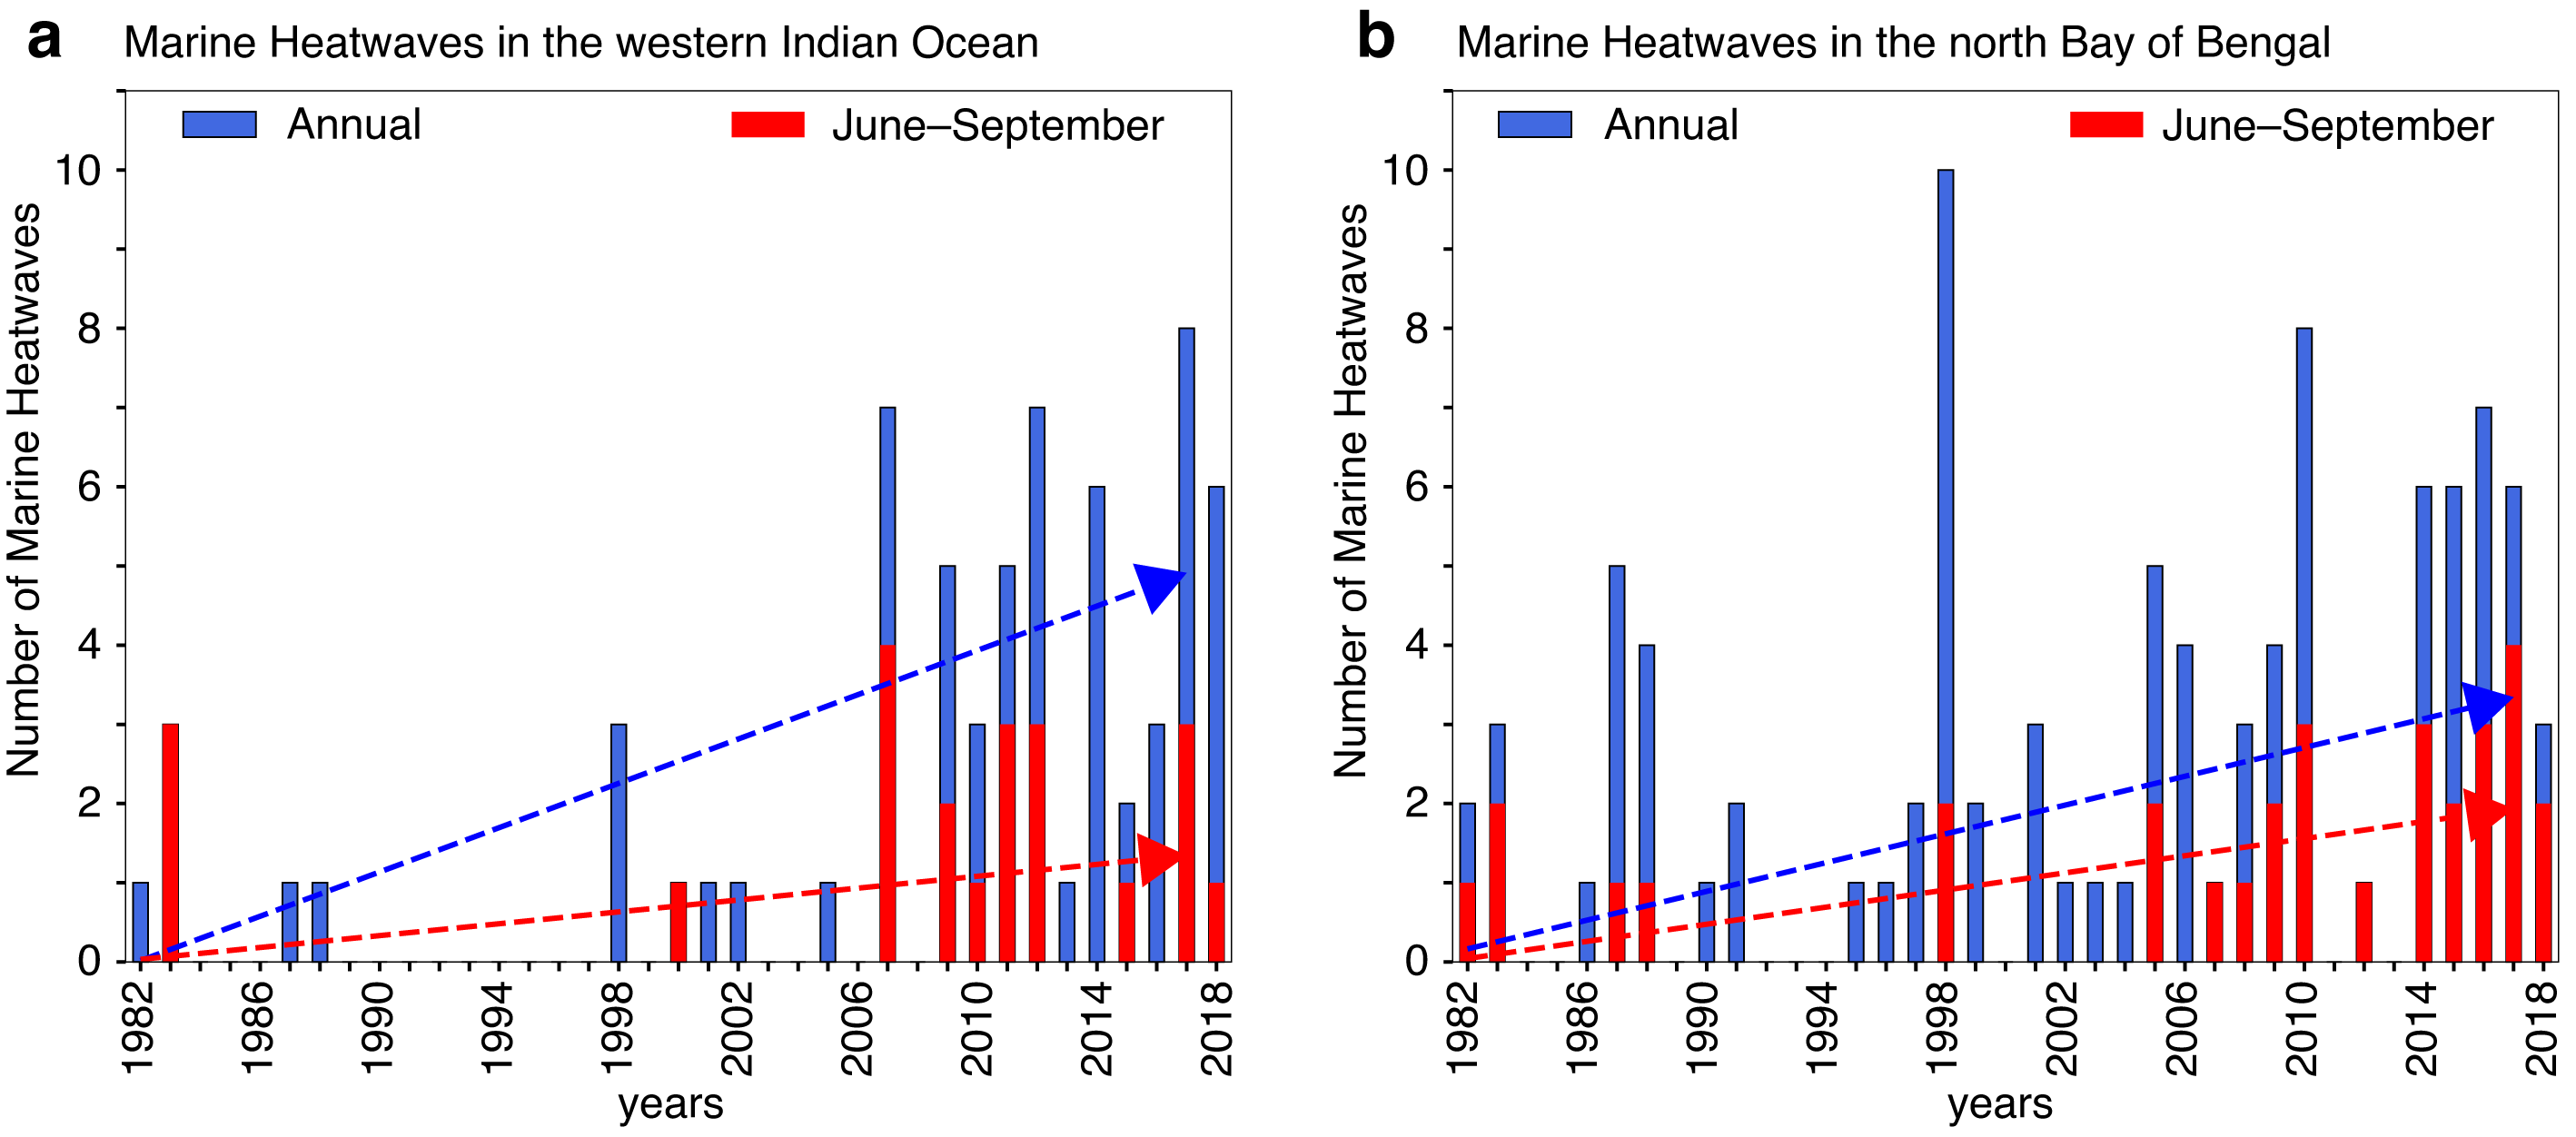 trend in marine heatwaves over the western Indian Ocean and Bay of Bengal